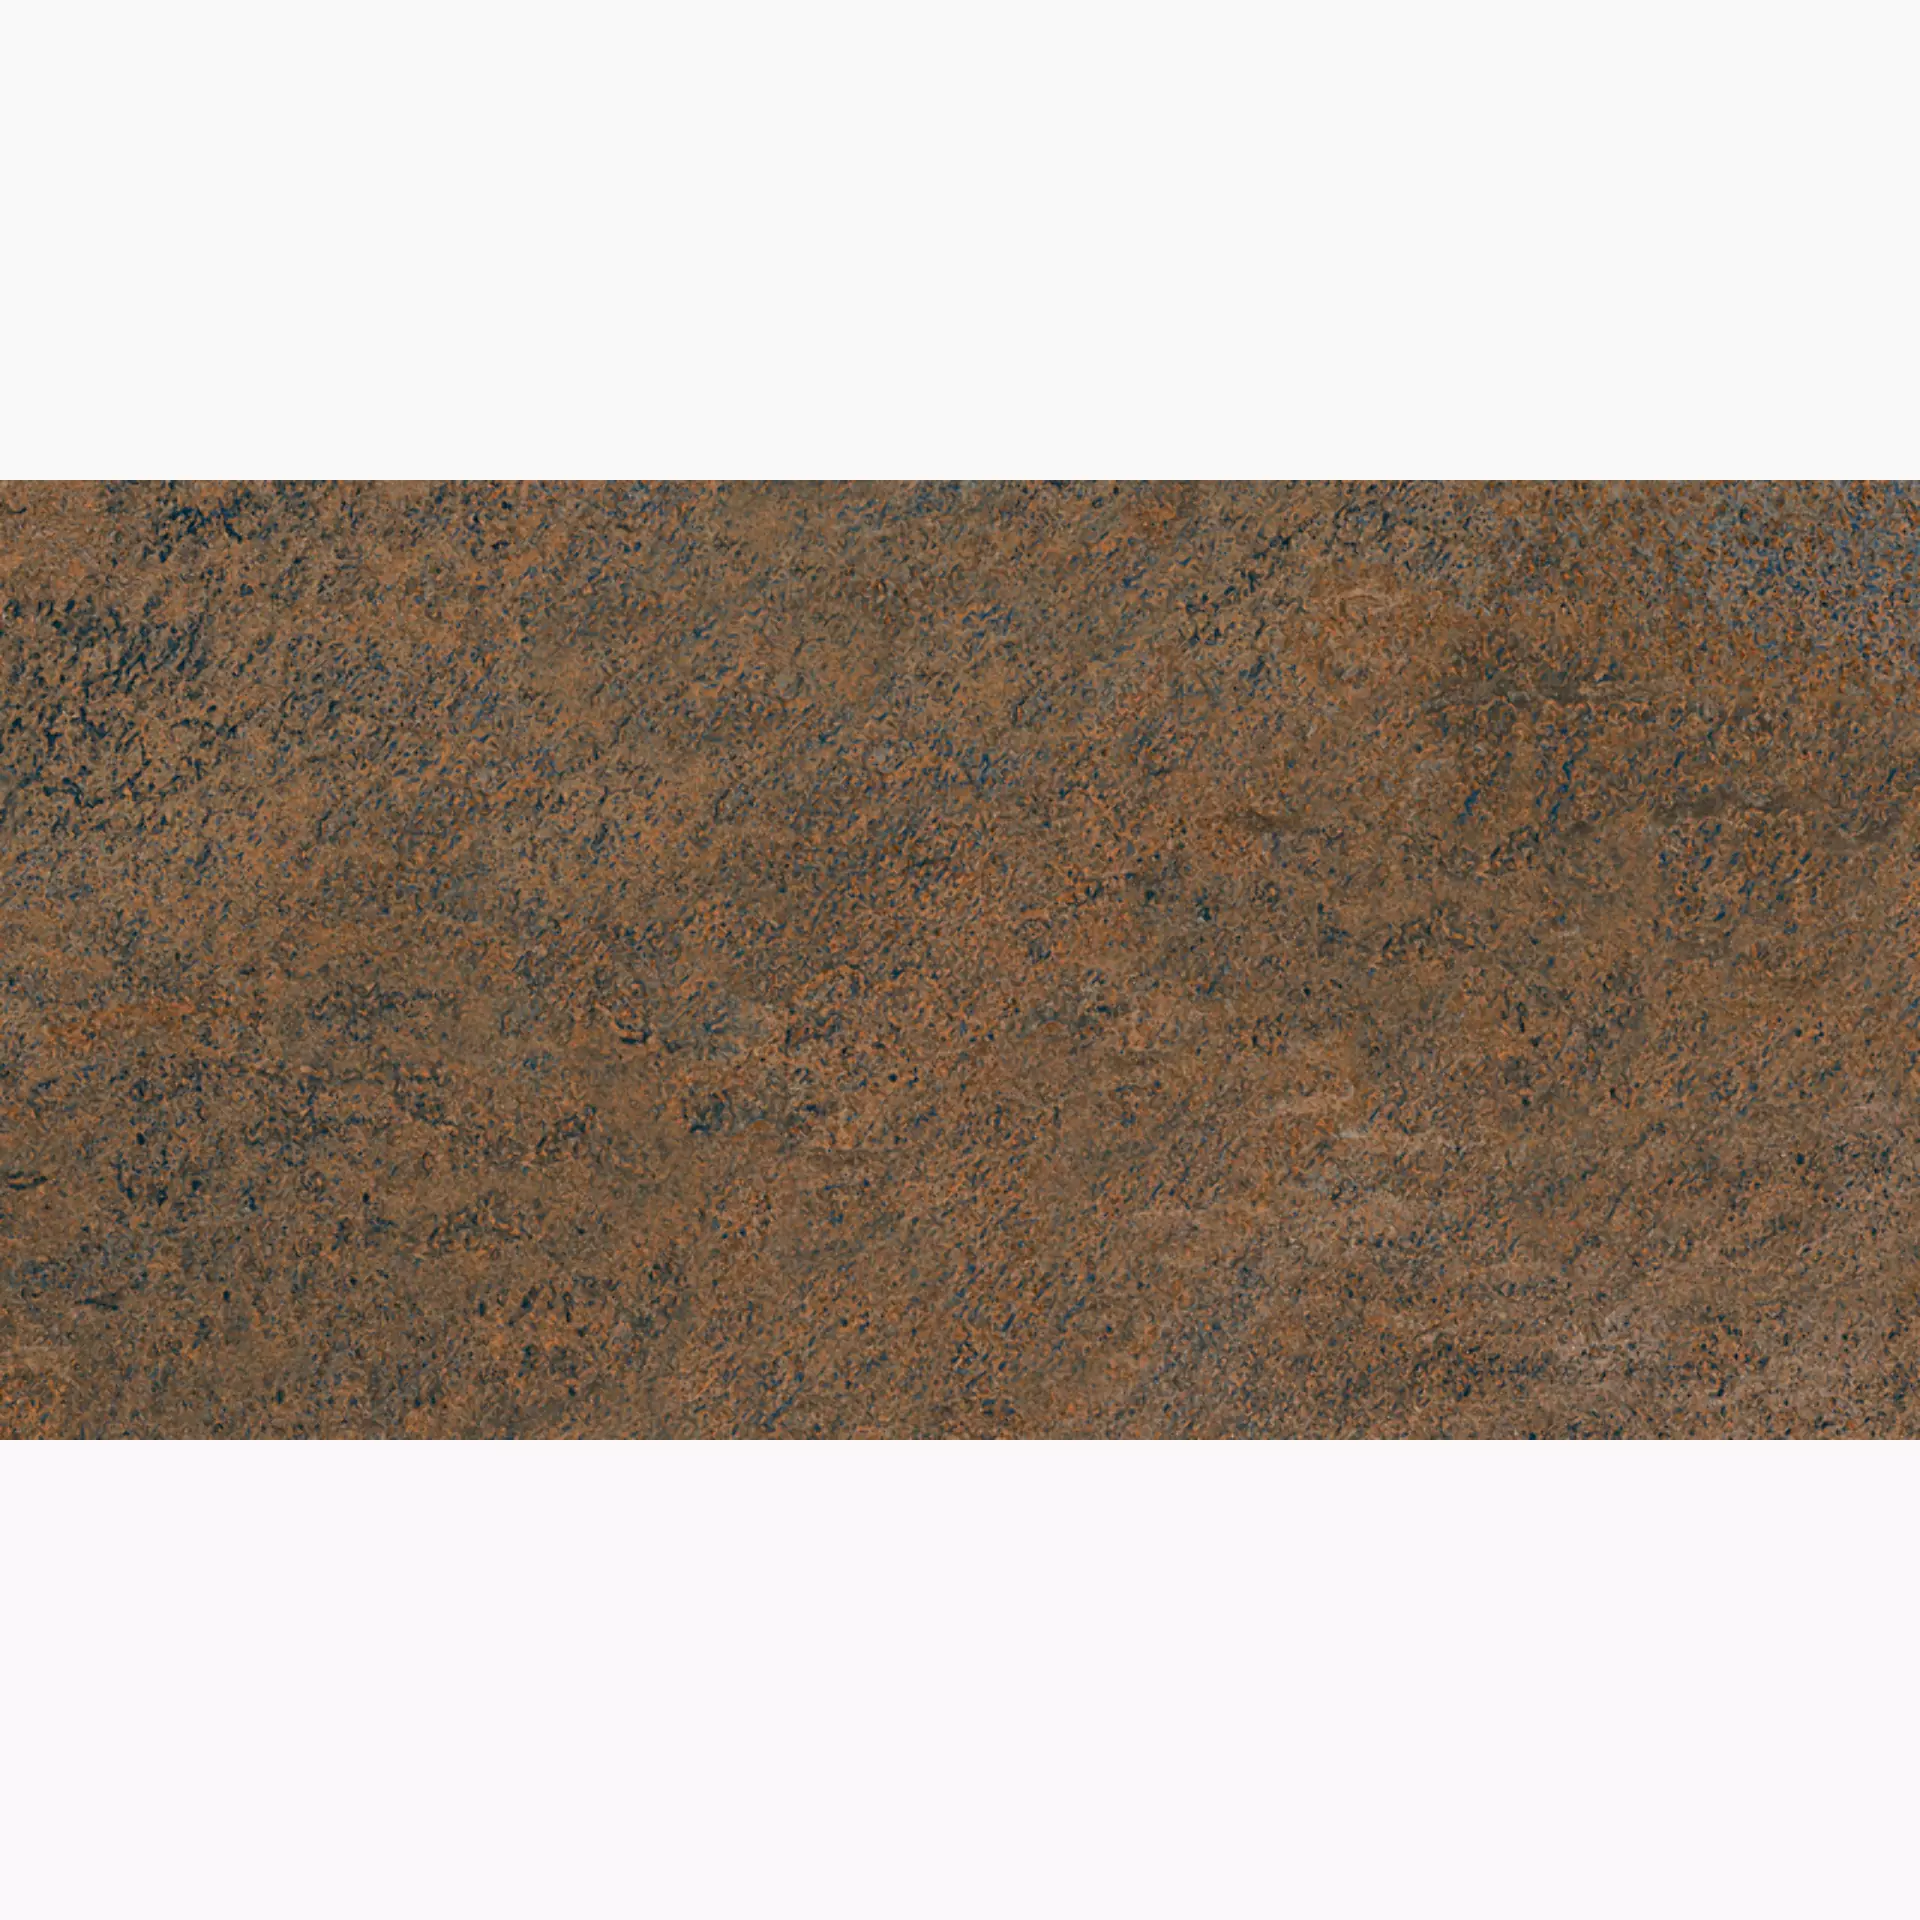 Sant Agostino Oxidart Copper Natural CSAOXCOP30 30x60cm rectified 10mm